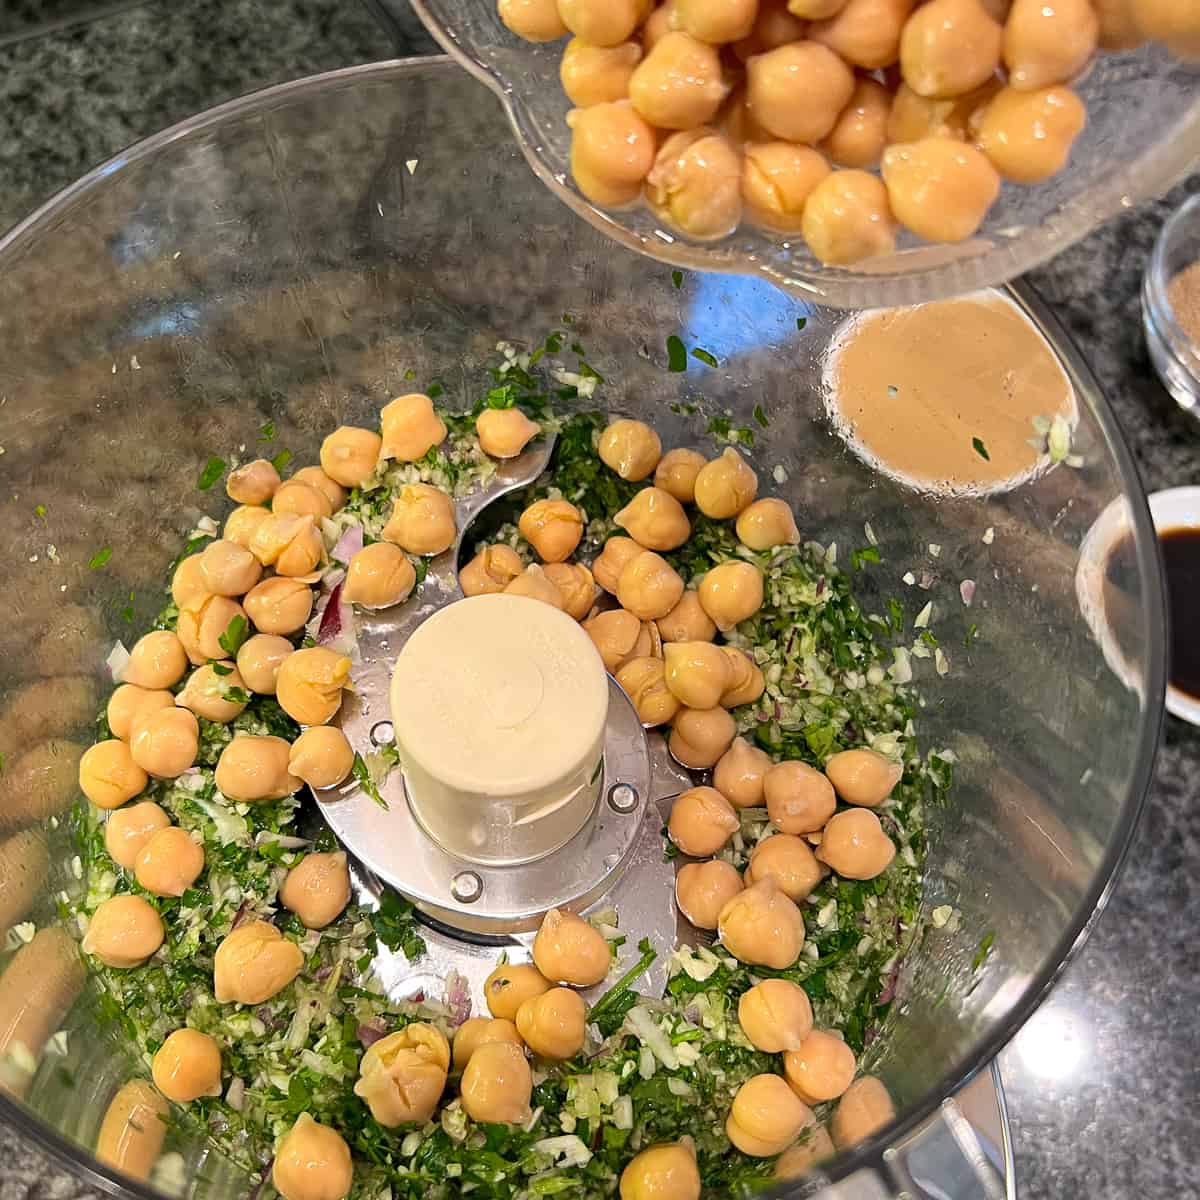 Chickpeas being added to food processor.